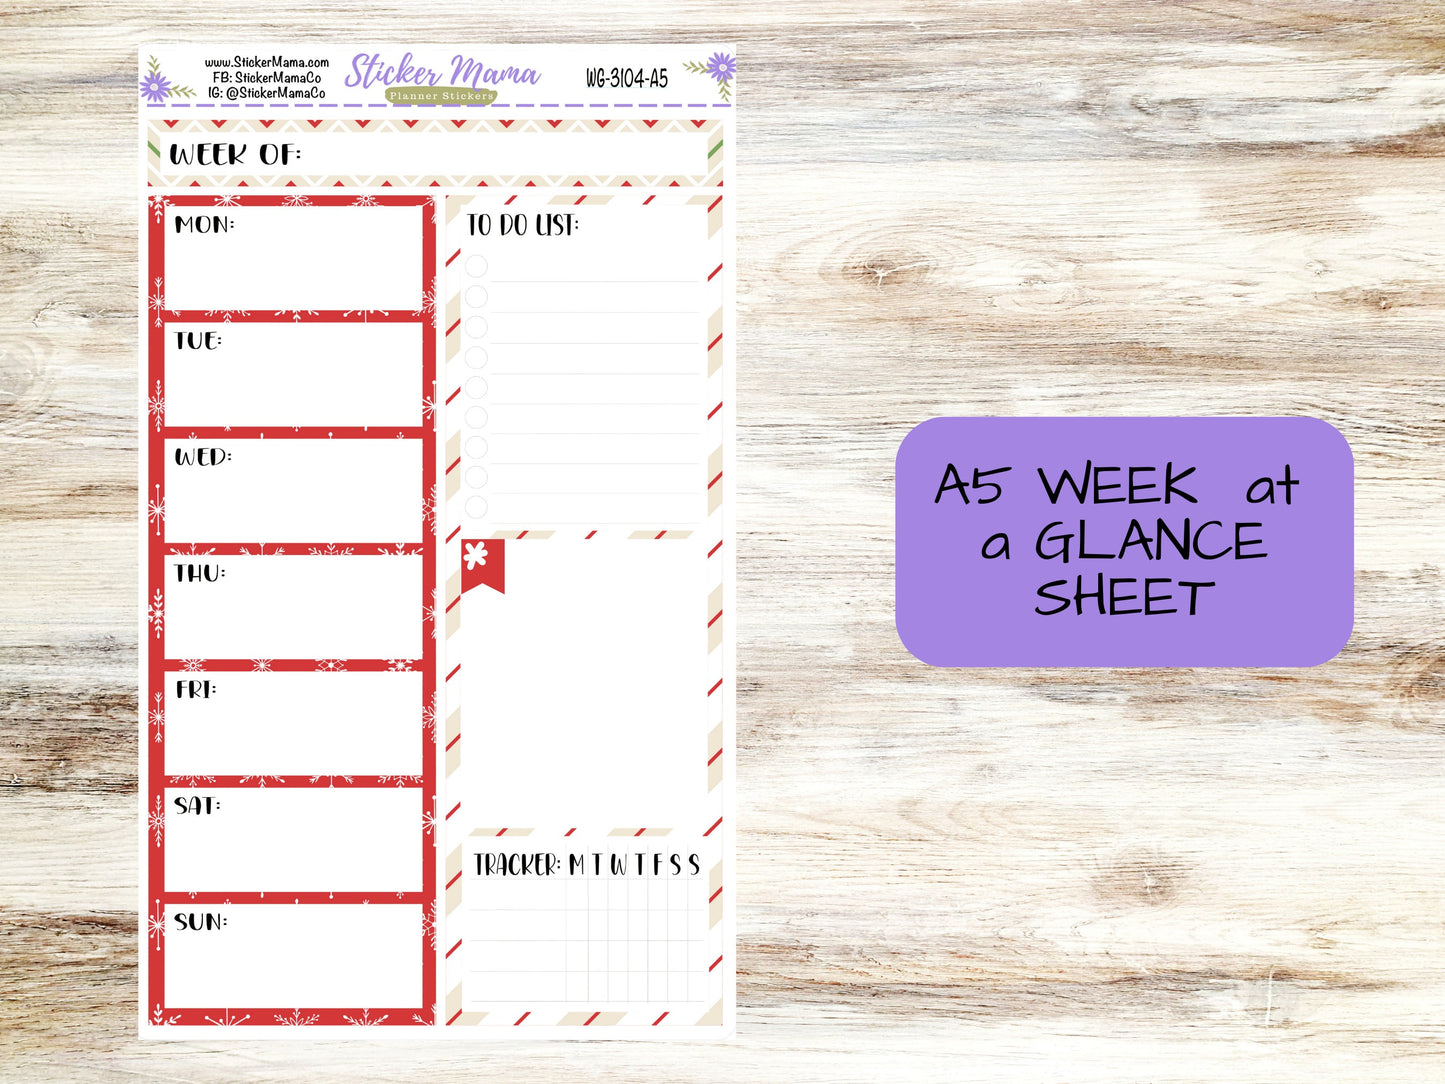 WEEK at a GLANCE-Kit #3104 || Santa's Here || Week at a Glance - weekly glance 7x9 or a5